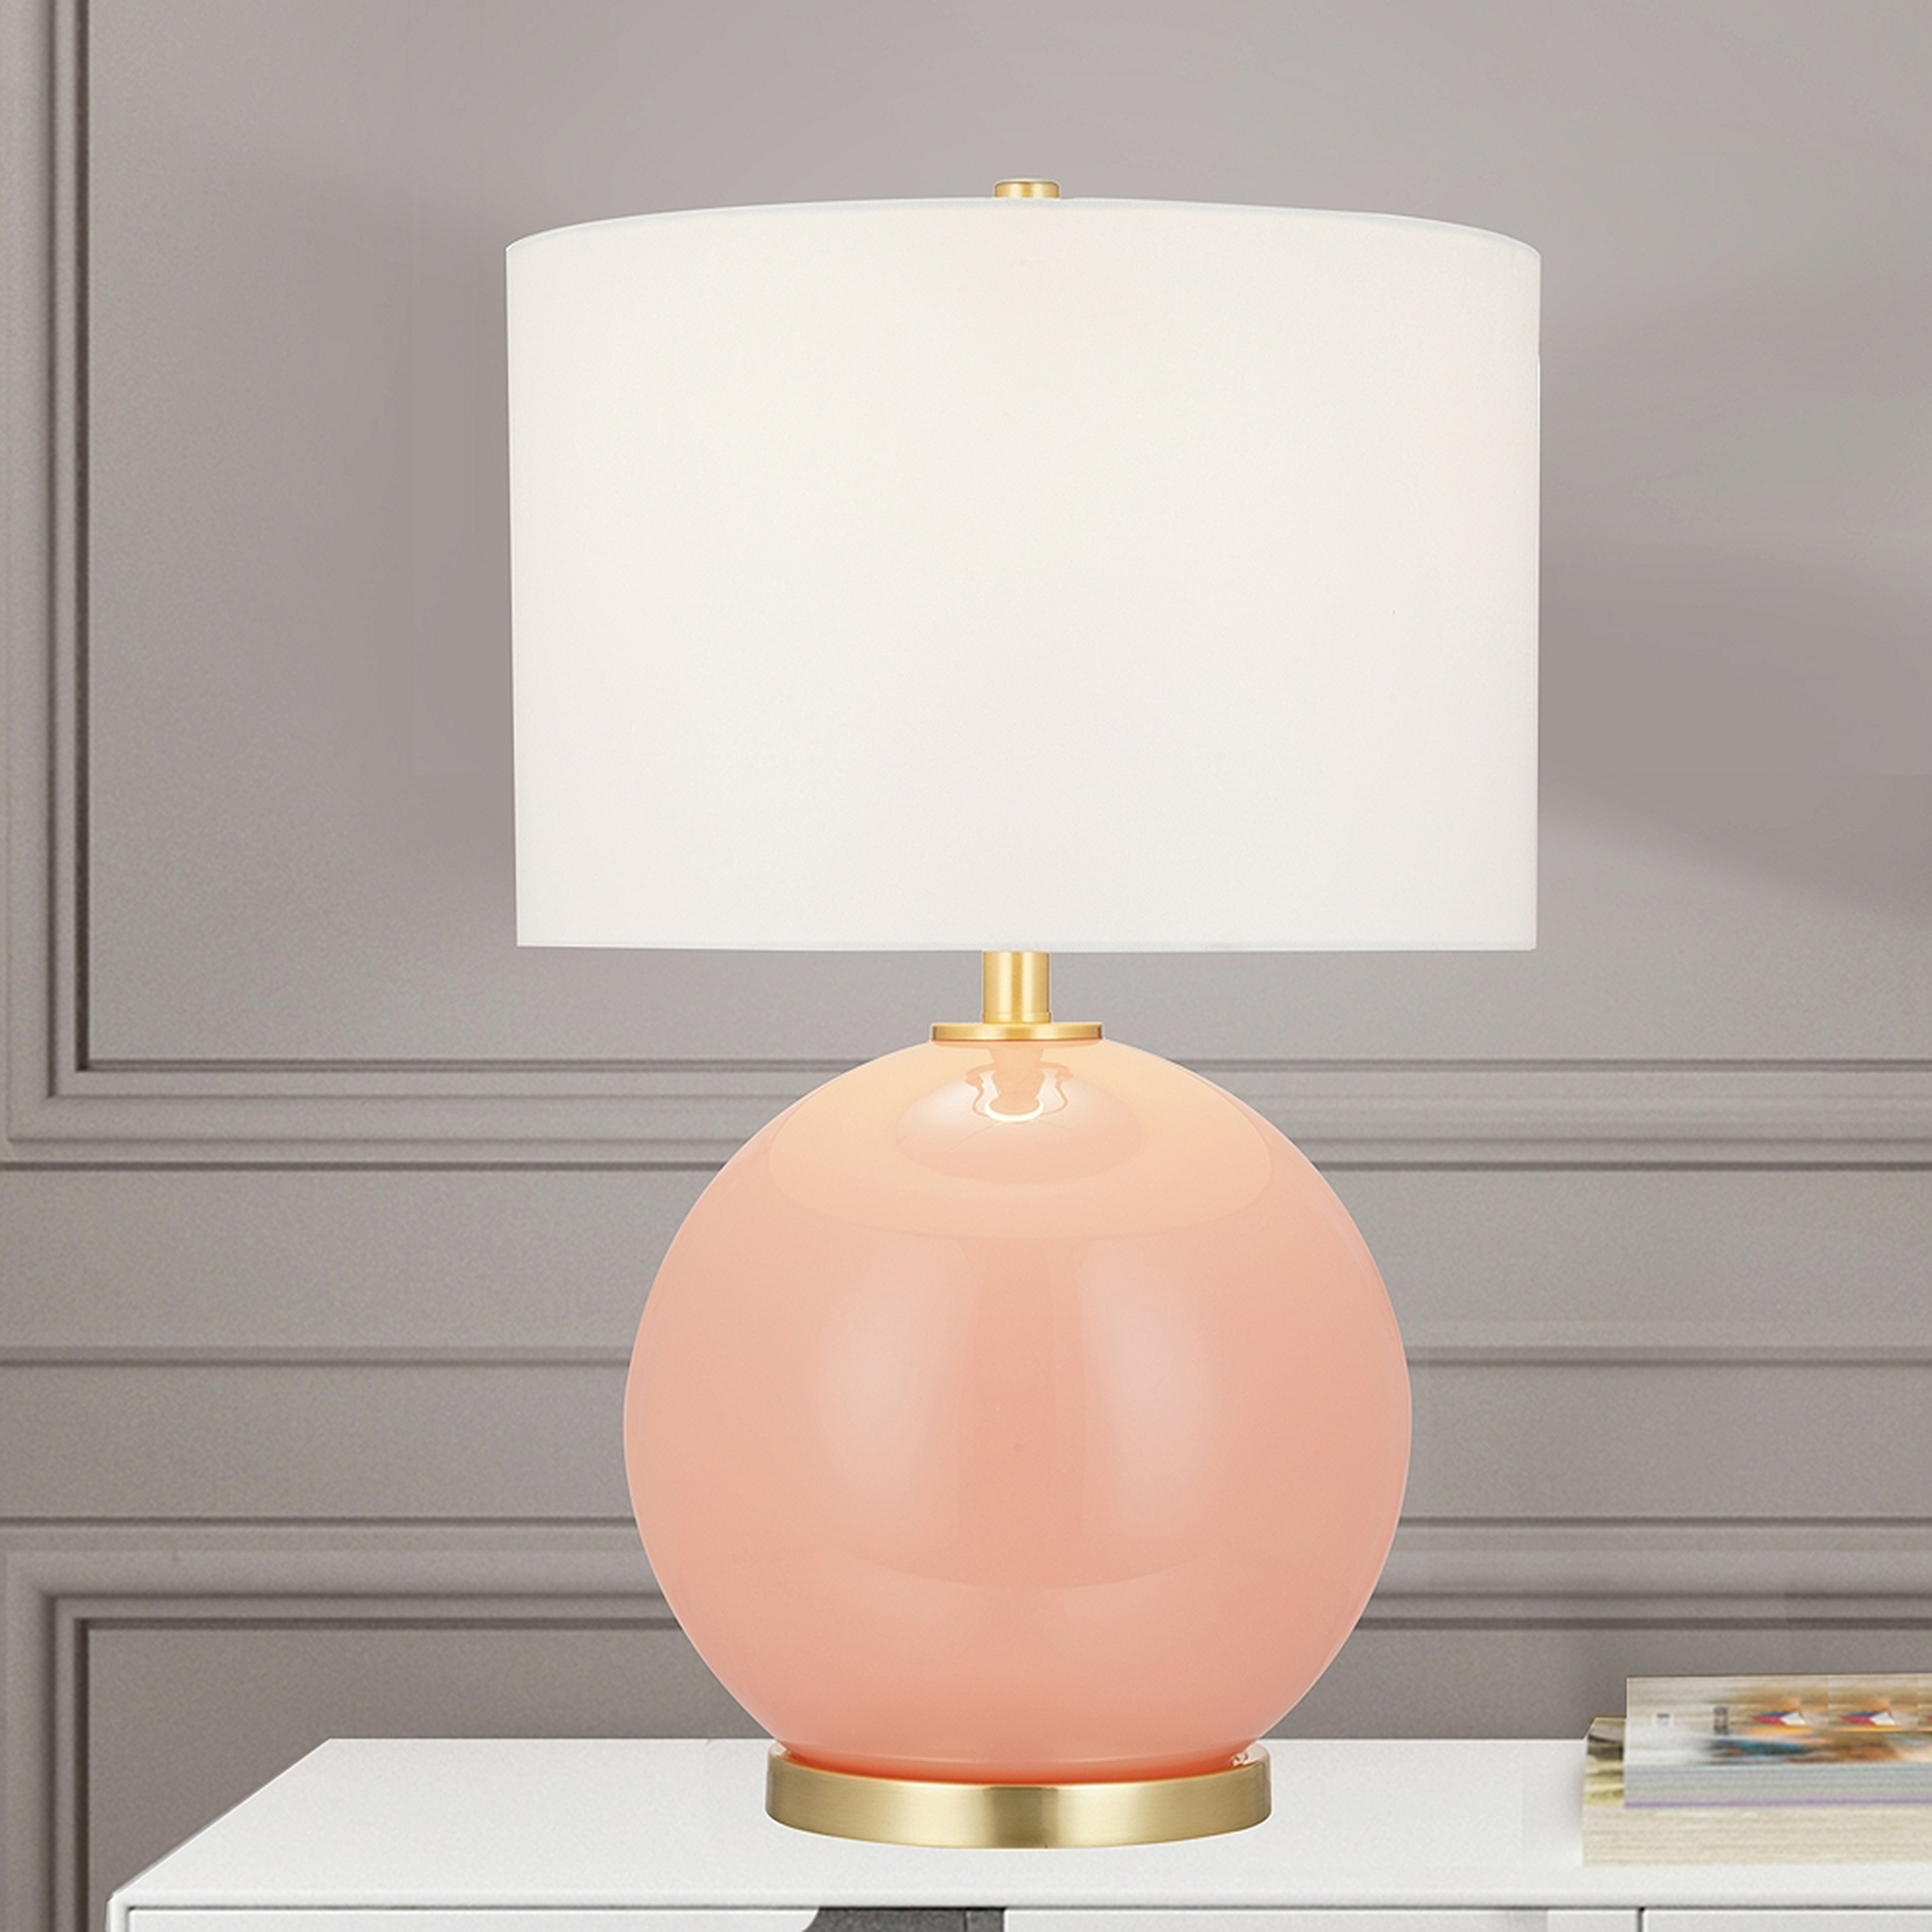 Peach Pink Coral Smooth Ceramic Sphere LED Table Lamp - Style # 82P71 - Lamps Plus